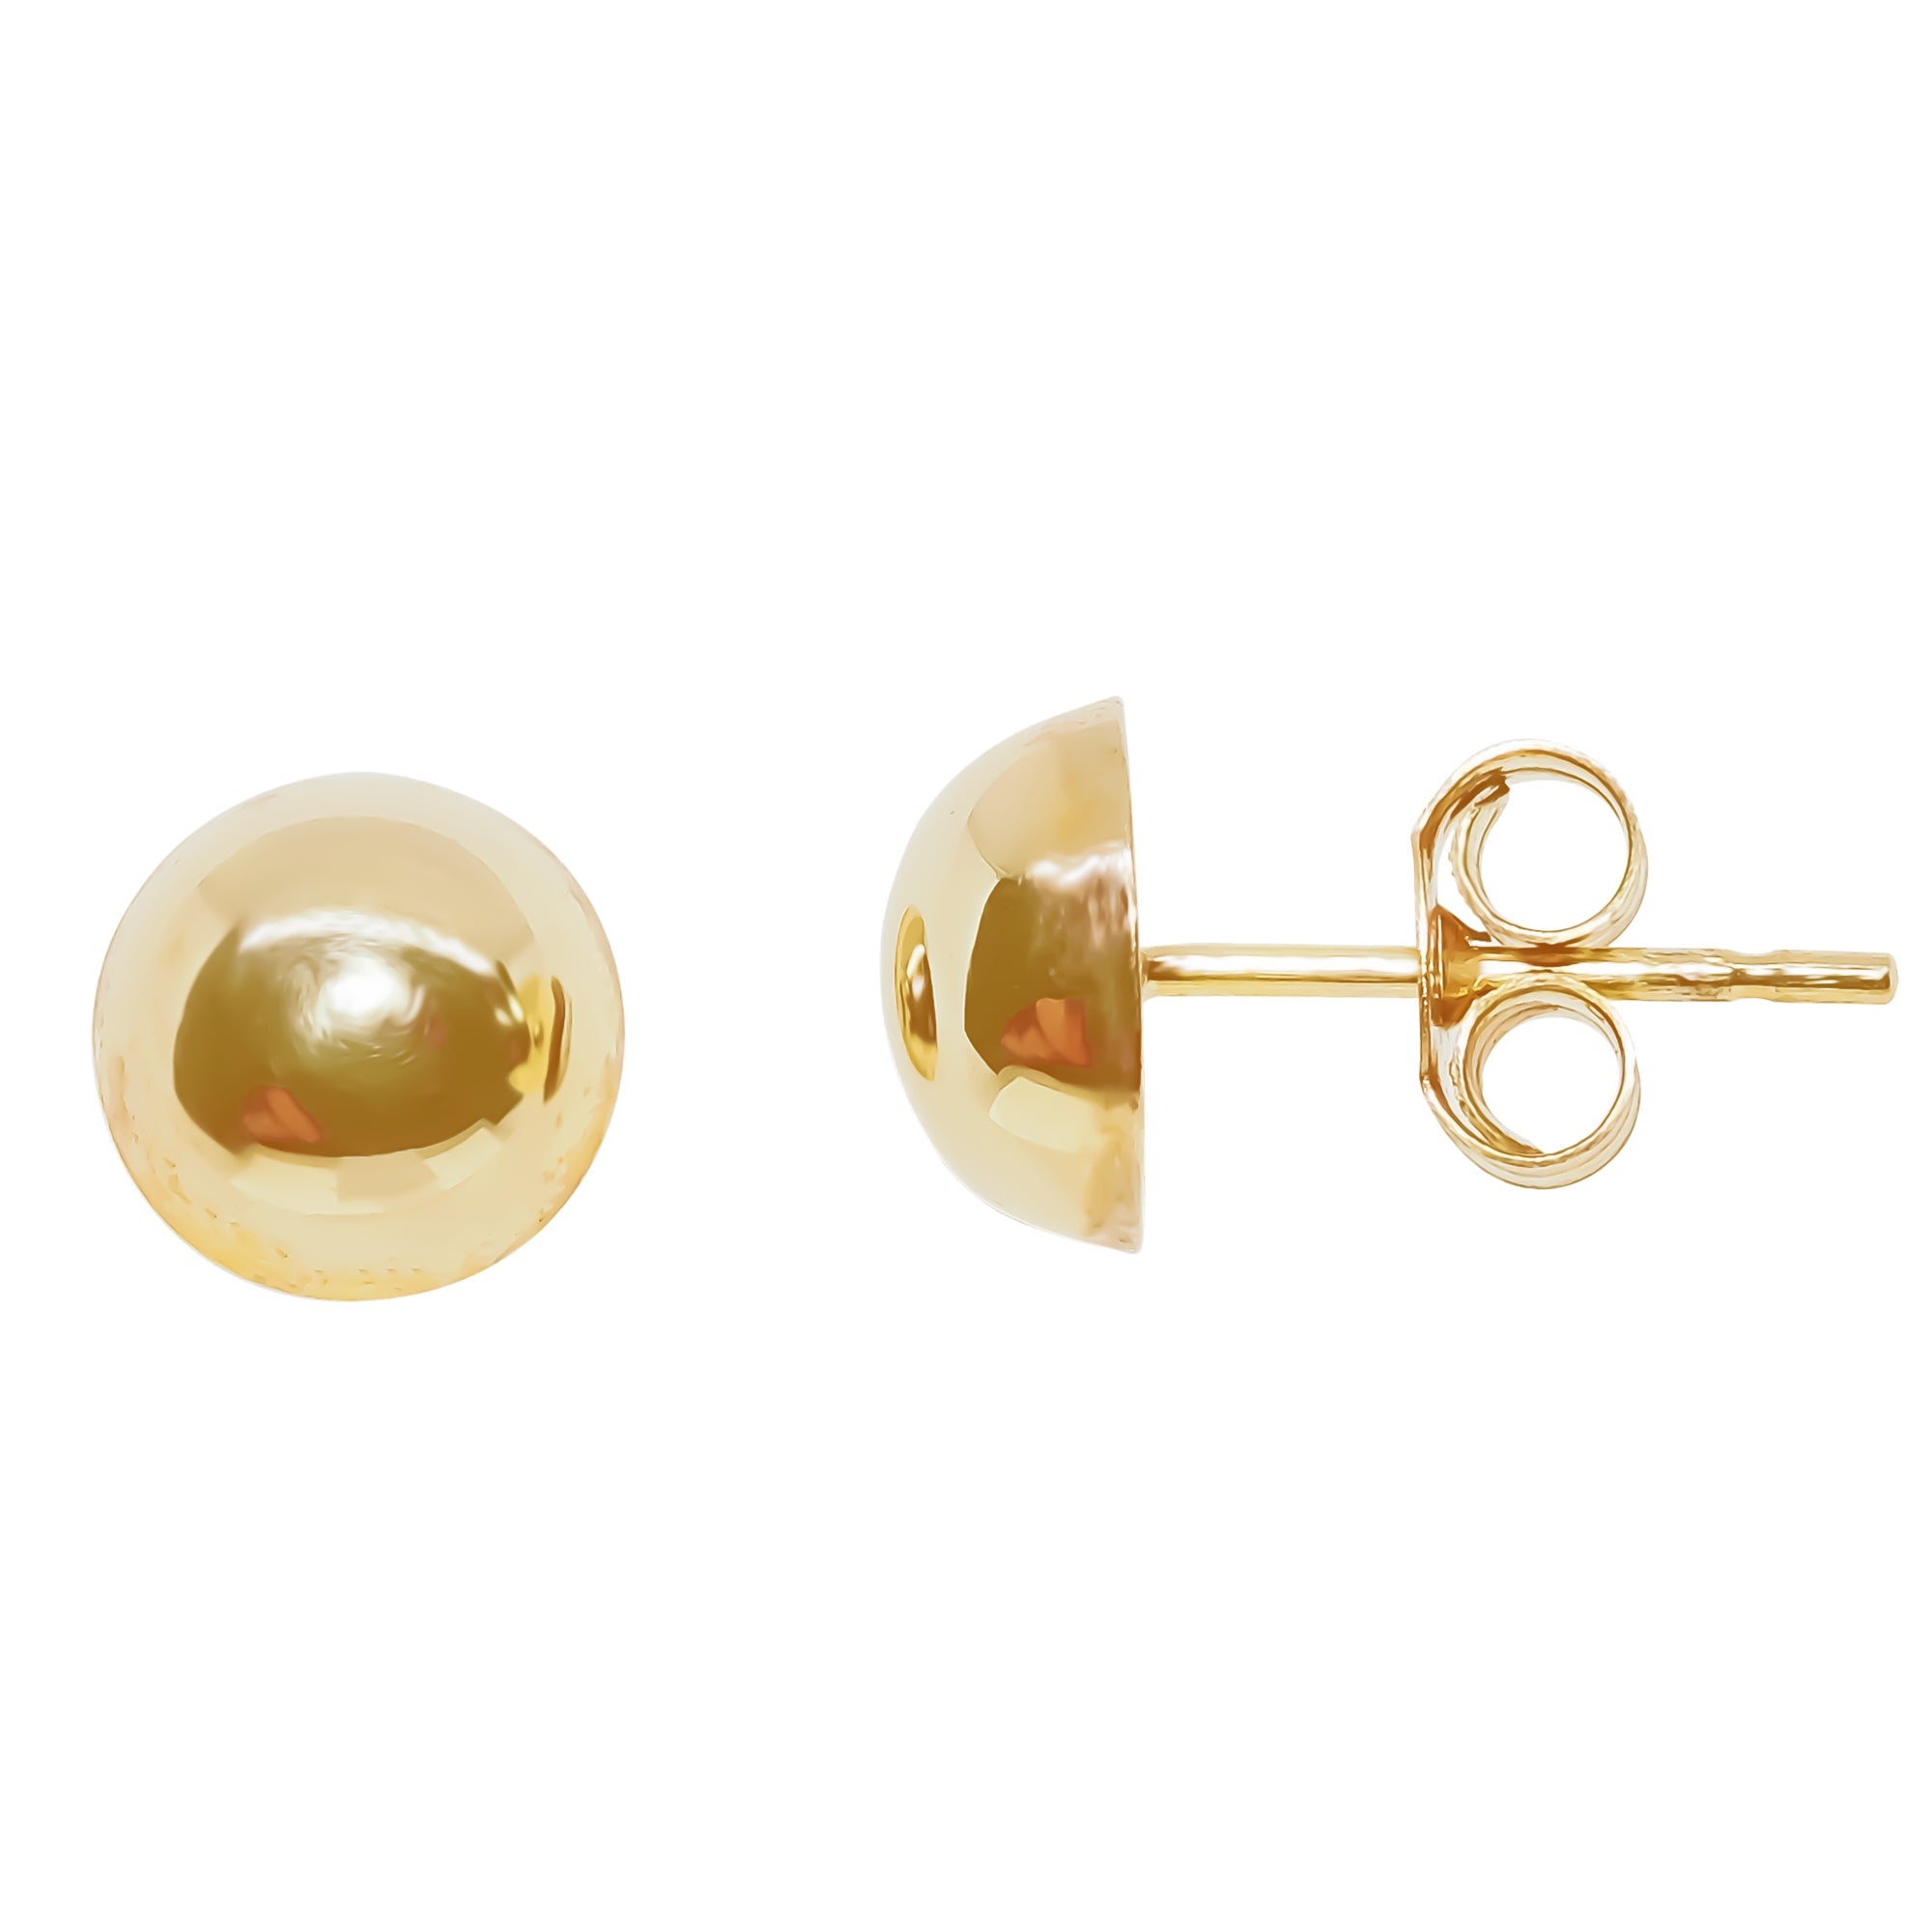 9ct gold 7mm dome stud earrings